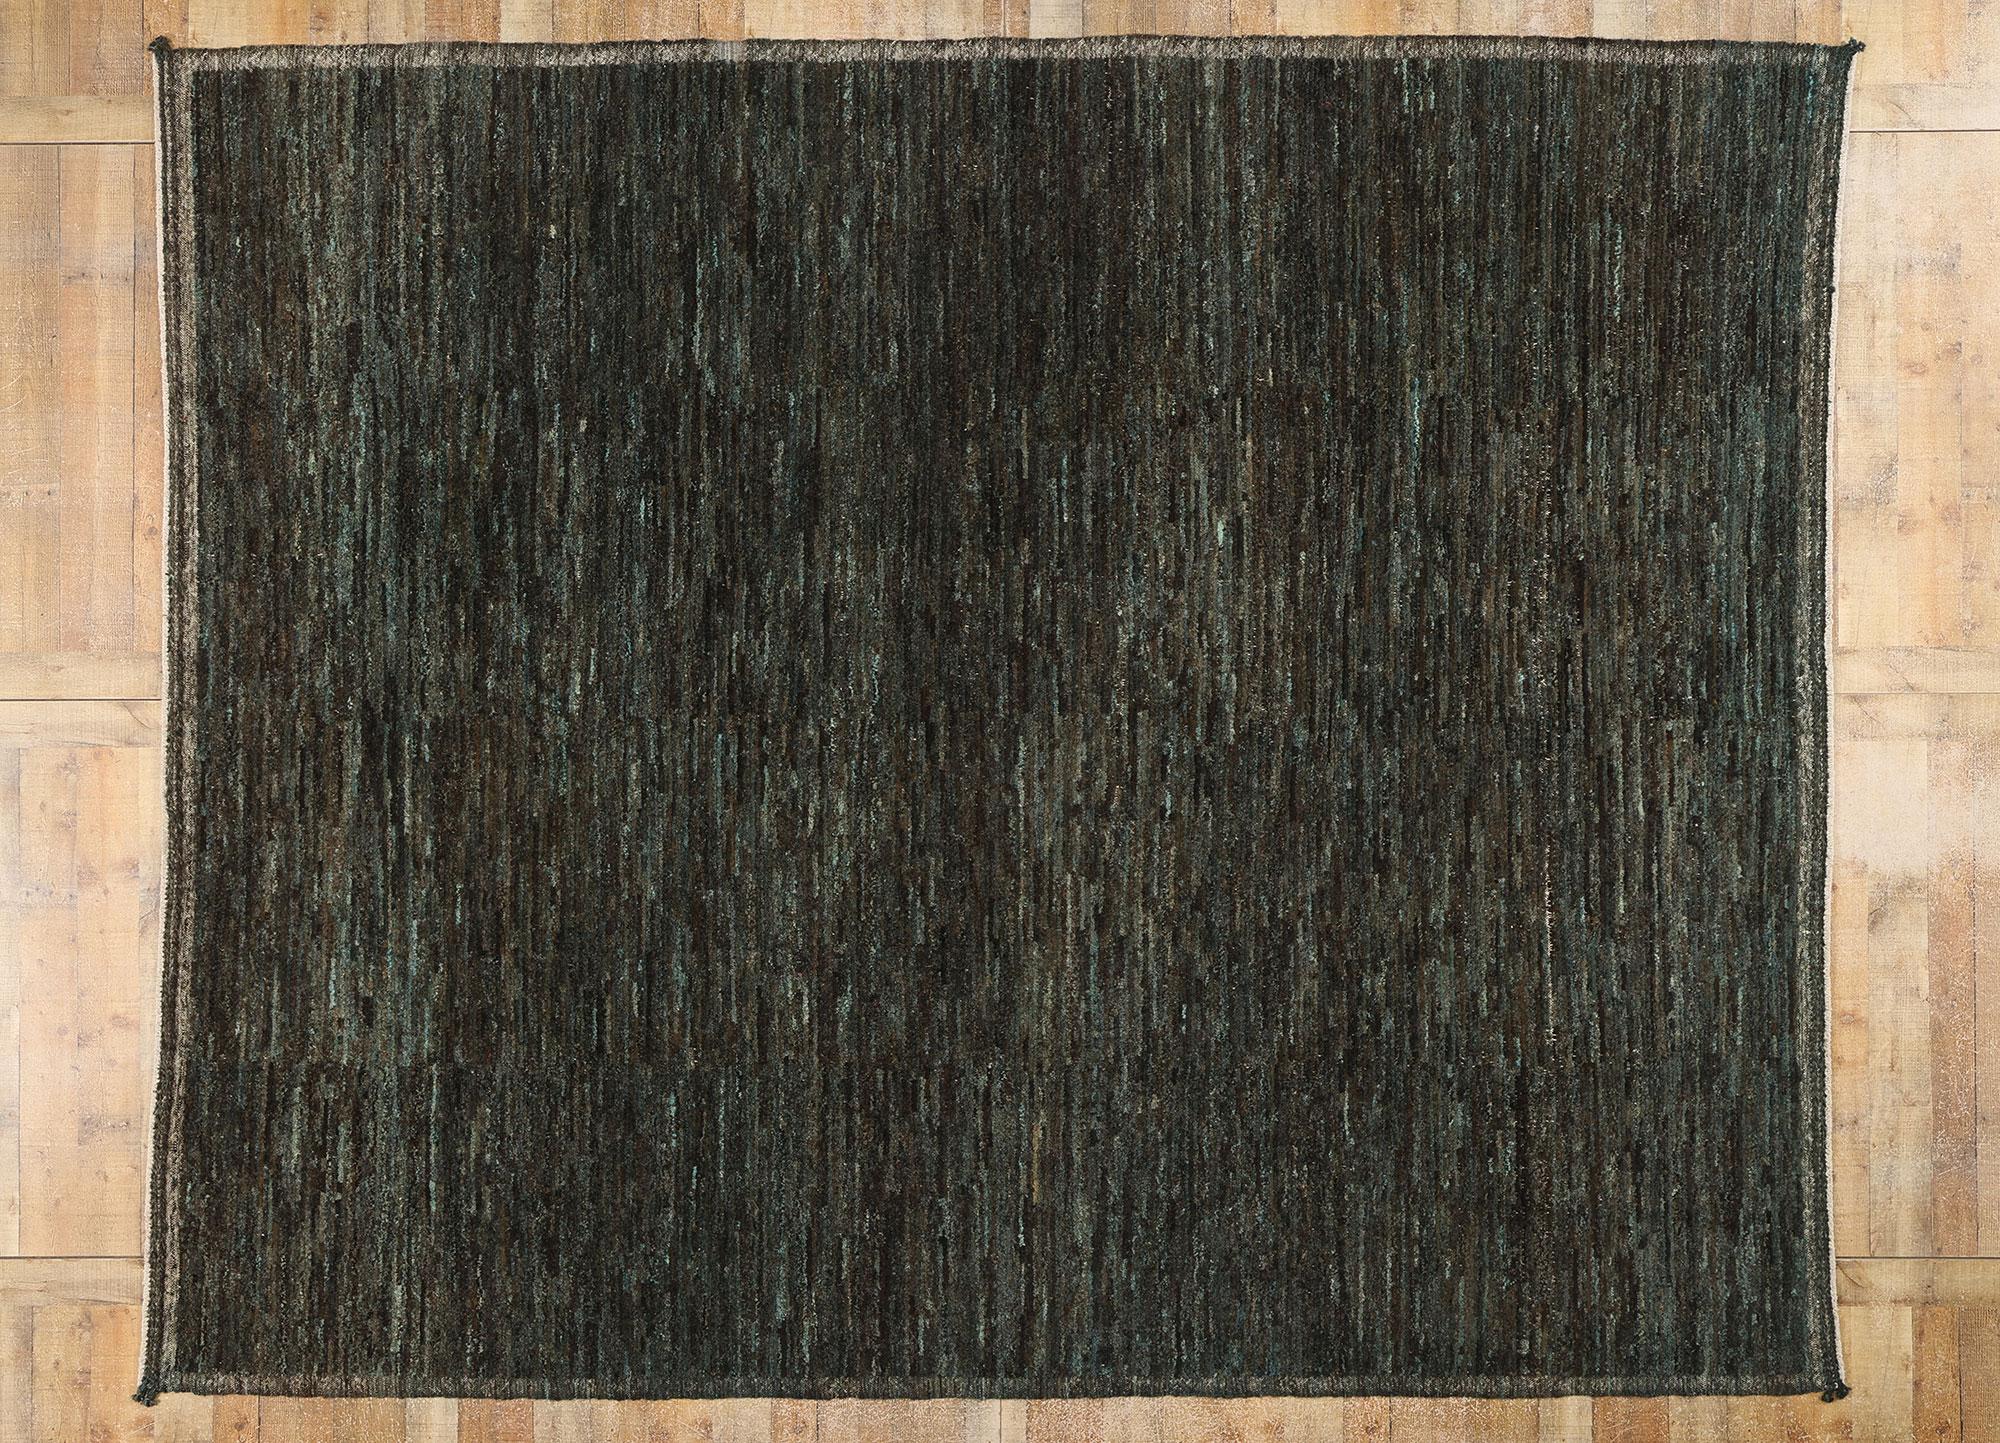 81059 Modern Biophilic Moroccan Area Rug, 09'09 x 11'11. In the mysterious depths of design, where shadows dance and whispers linger, Biophilia intertwines with the enigmatic allure of Japandi style and the serene whispers of Zen principles. Within